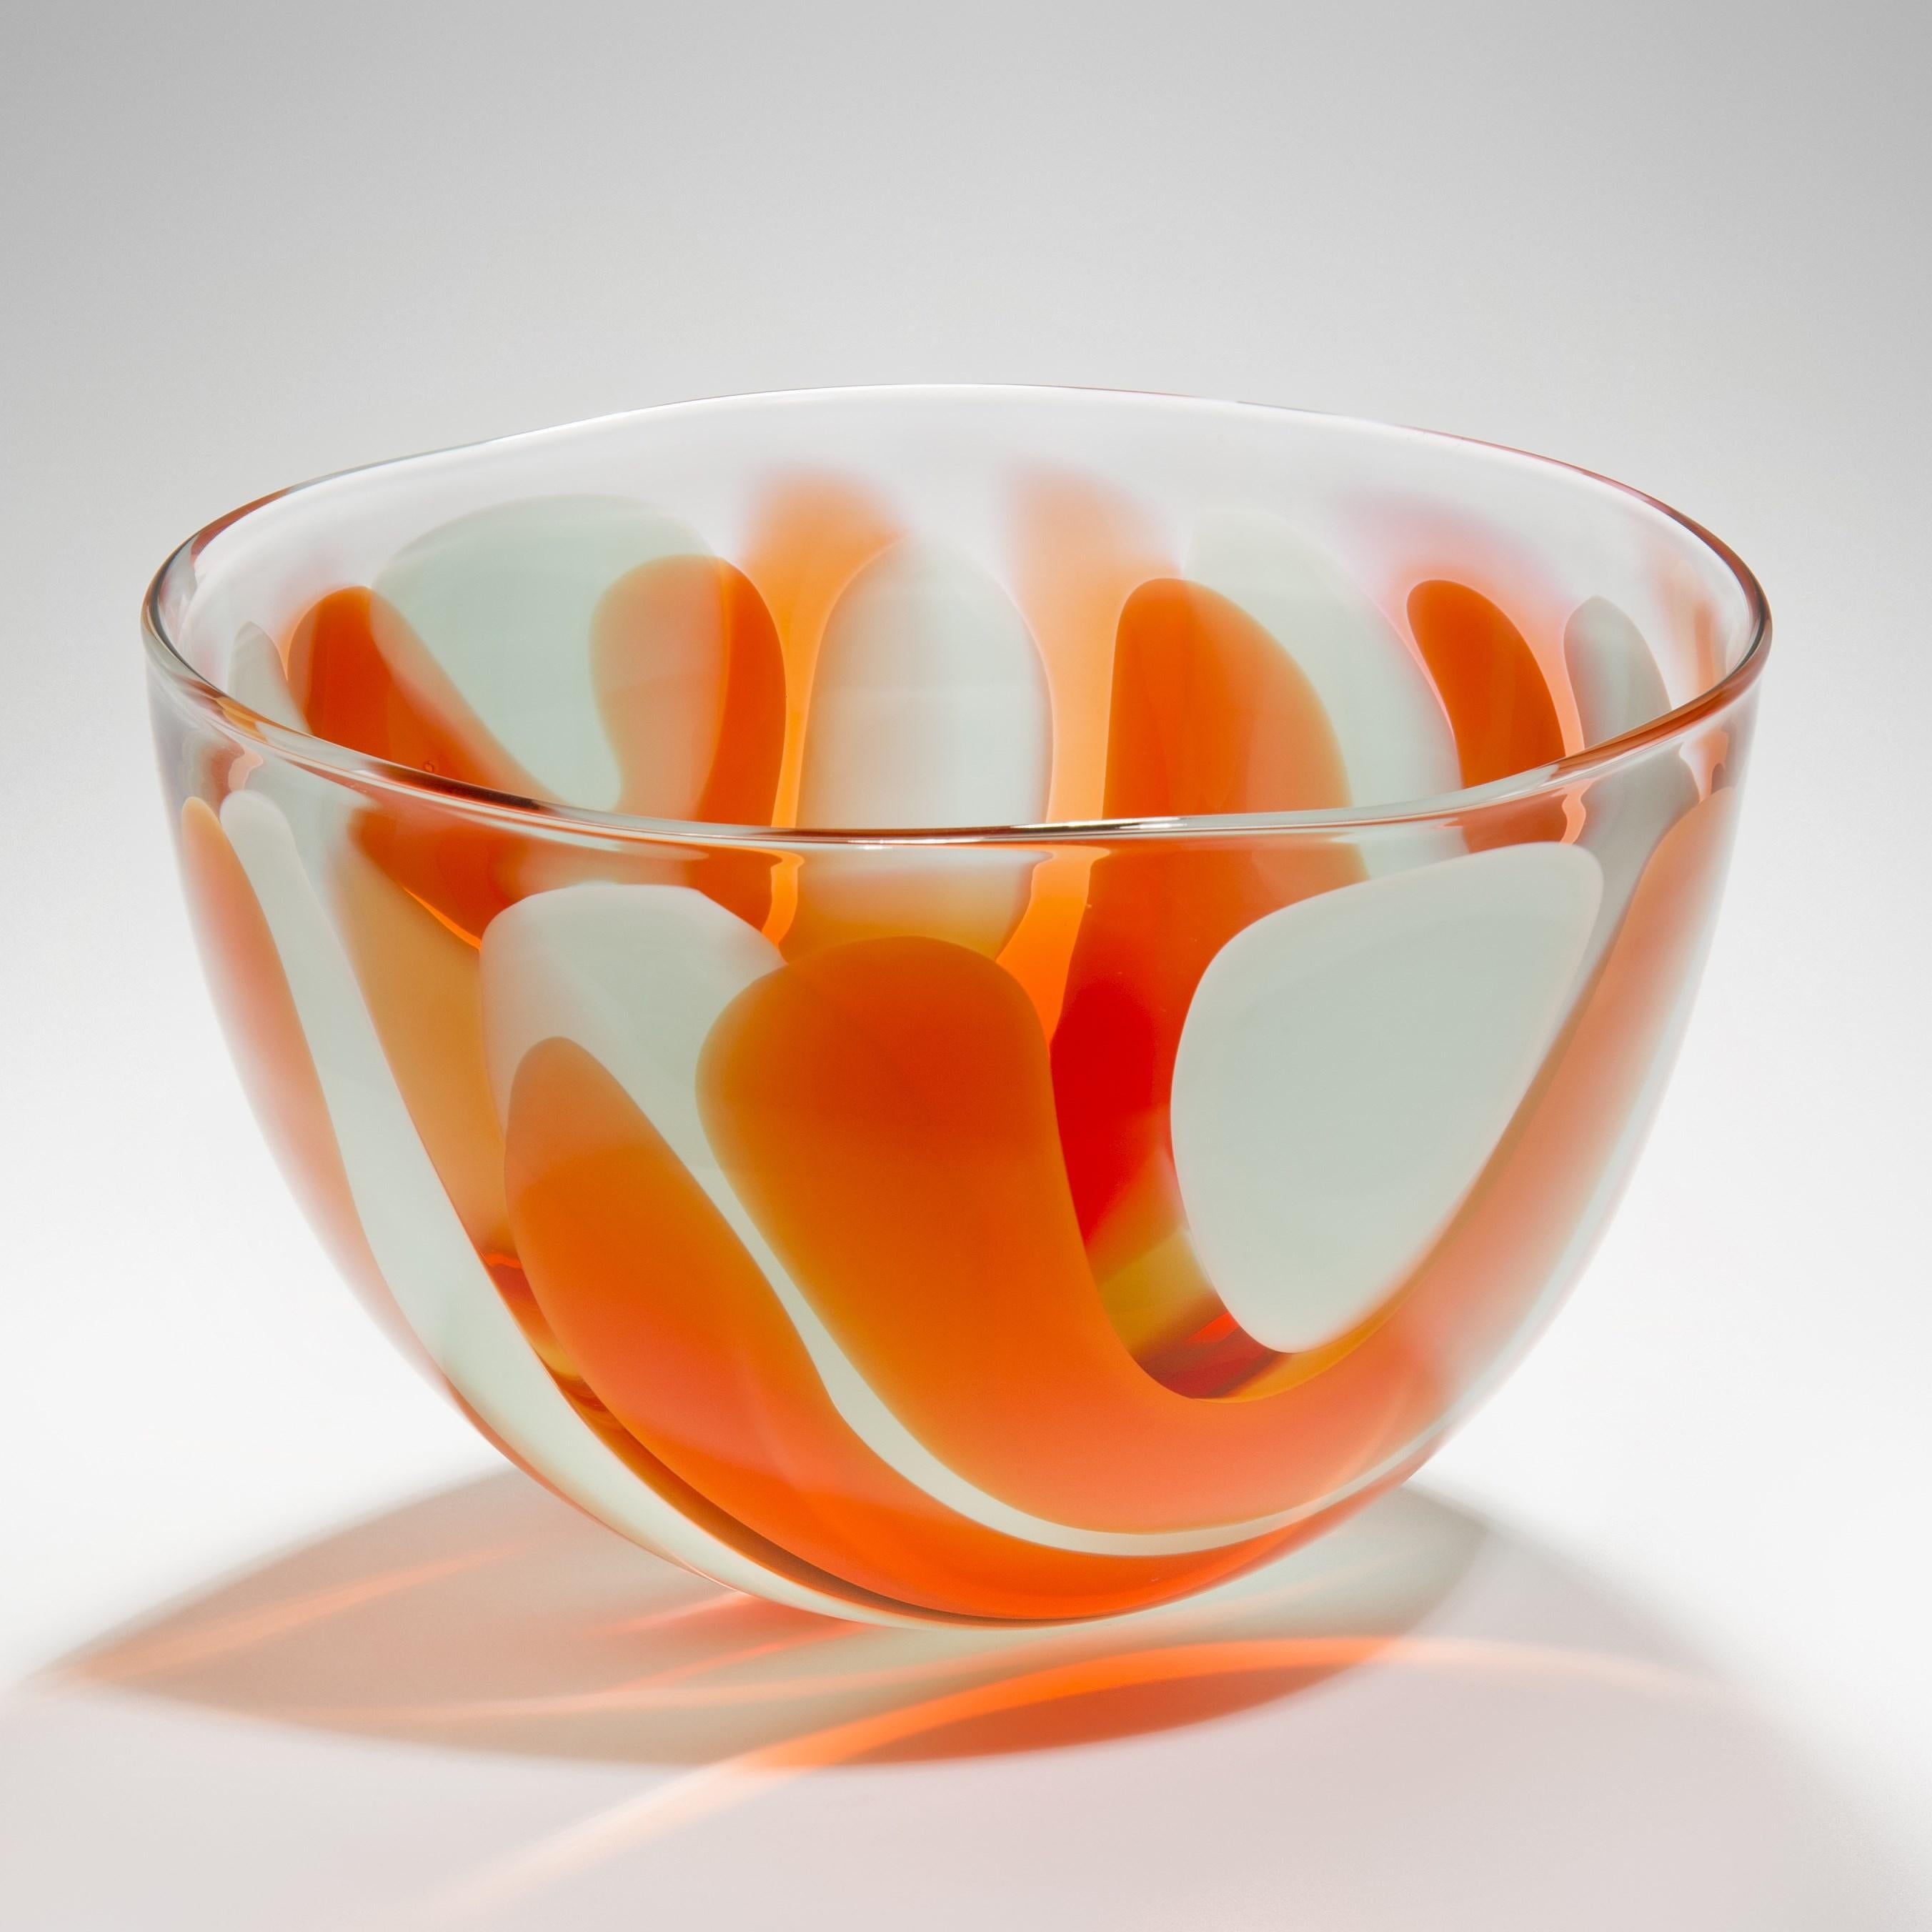 'Waves No 370' is a beautifully crafted, handblown glass bowl by the British artist, Neil Wilkin.

'Waves' is a collection of beautifully crafted, unique glass bowls and centrepieces by the British artist Neil Wilkin. Taking a painterly approach,